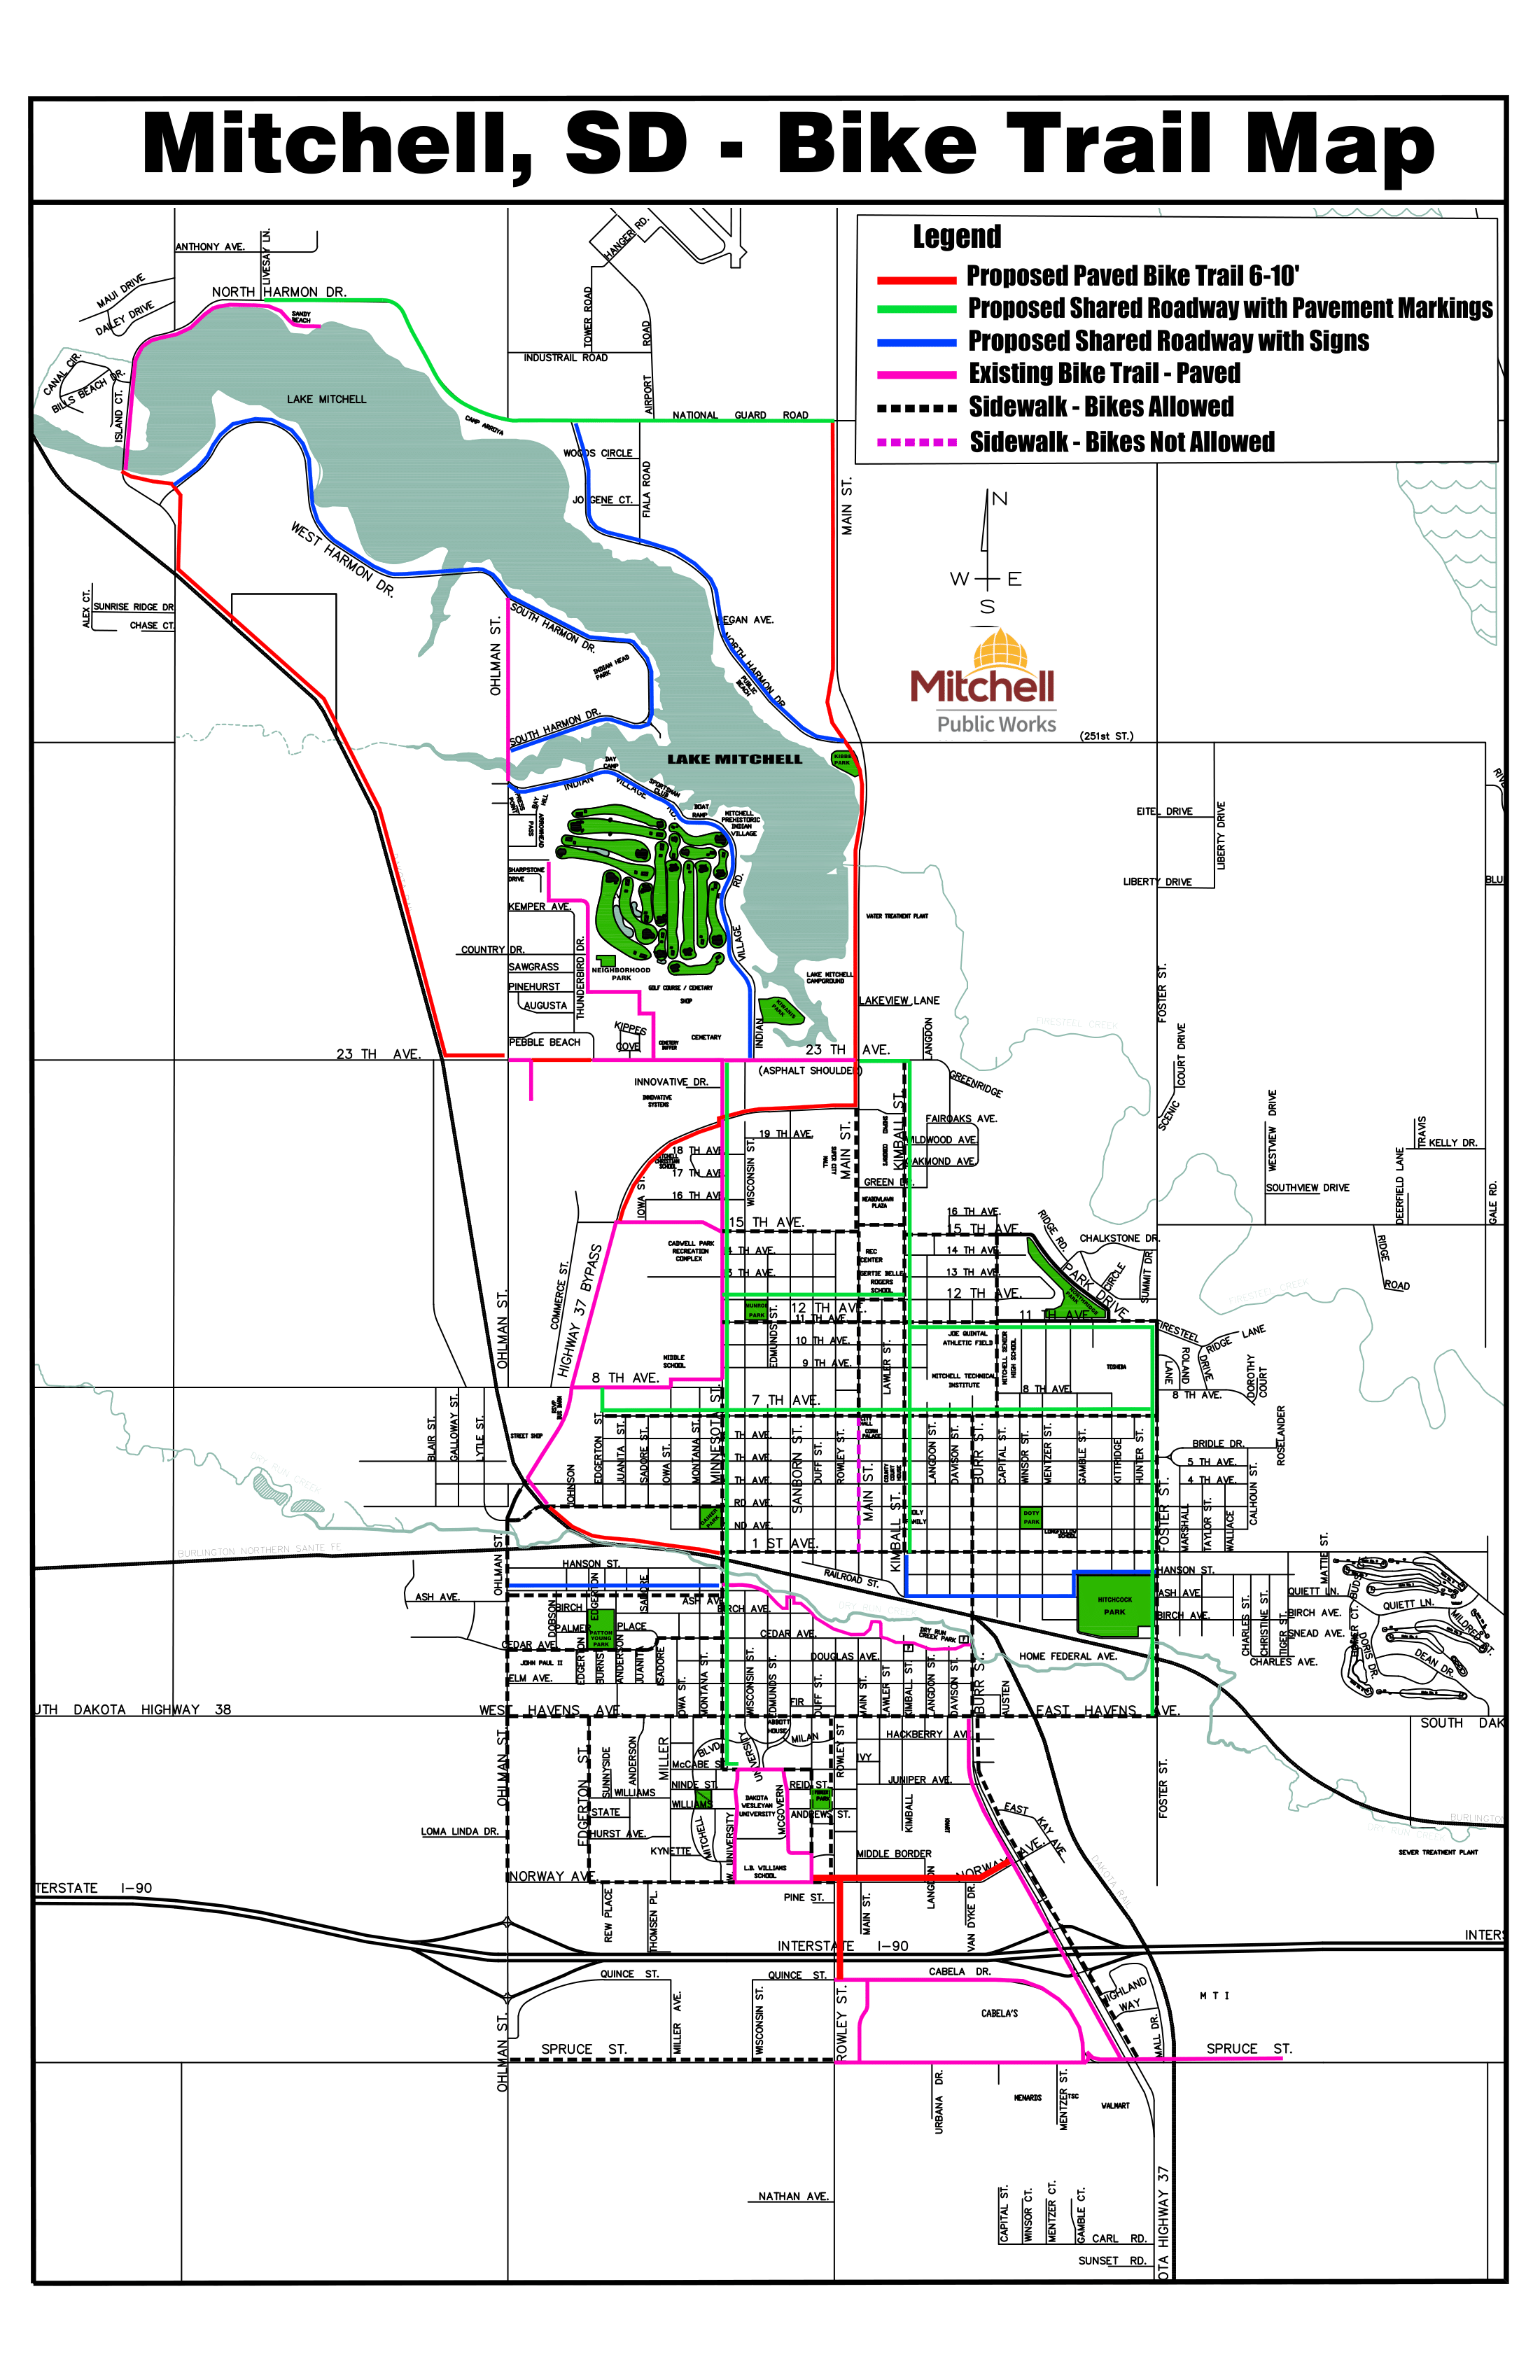 City of Mitchell map showing locations of future bike trail, existing bike trail, and proposed shared roadways. www.cityofmitchell.org/447/Trails